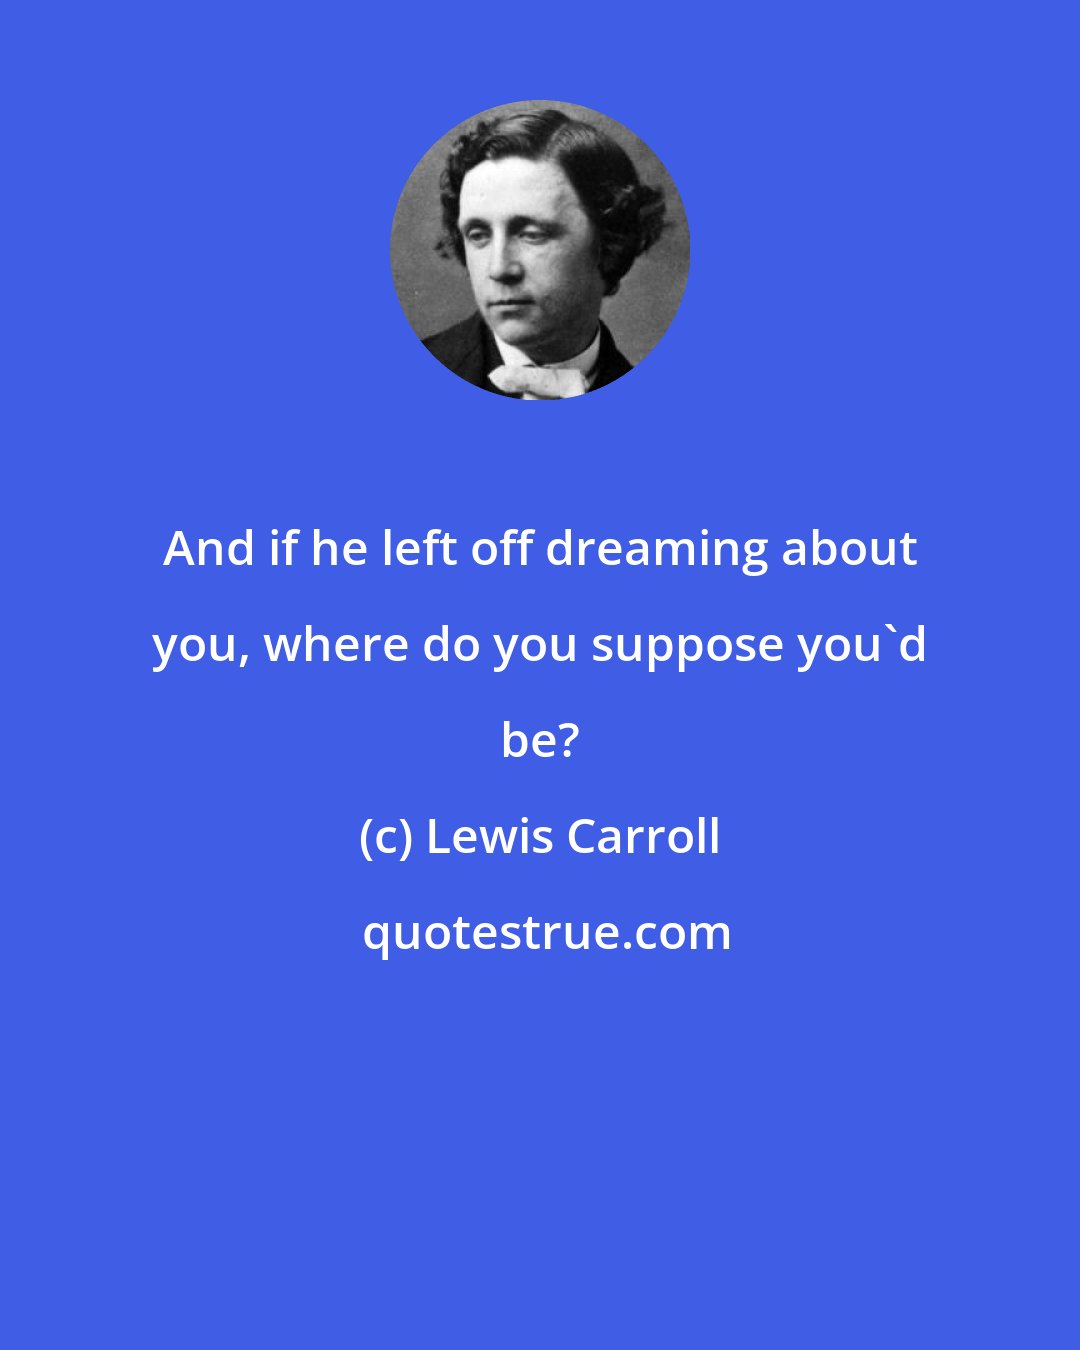 Lewis Carroll: And if he left off dreaming about you, where do you suppose you'd be?